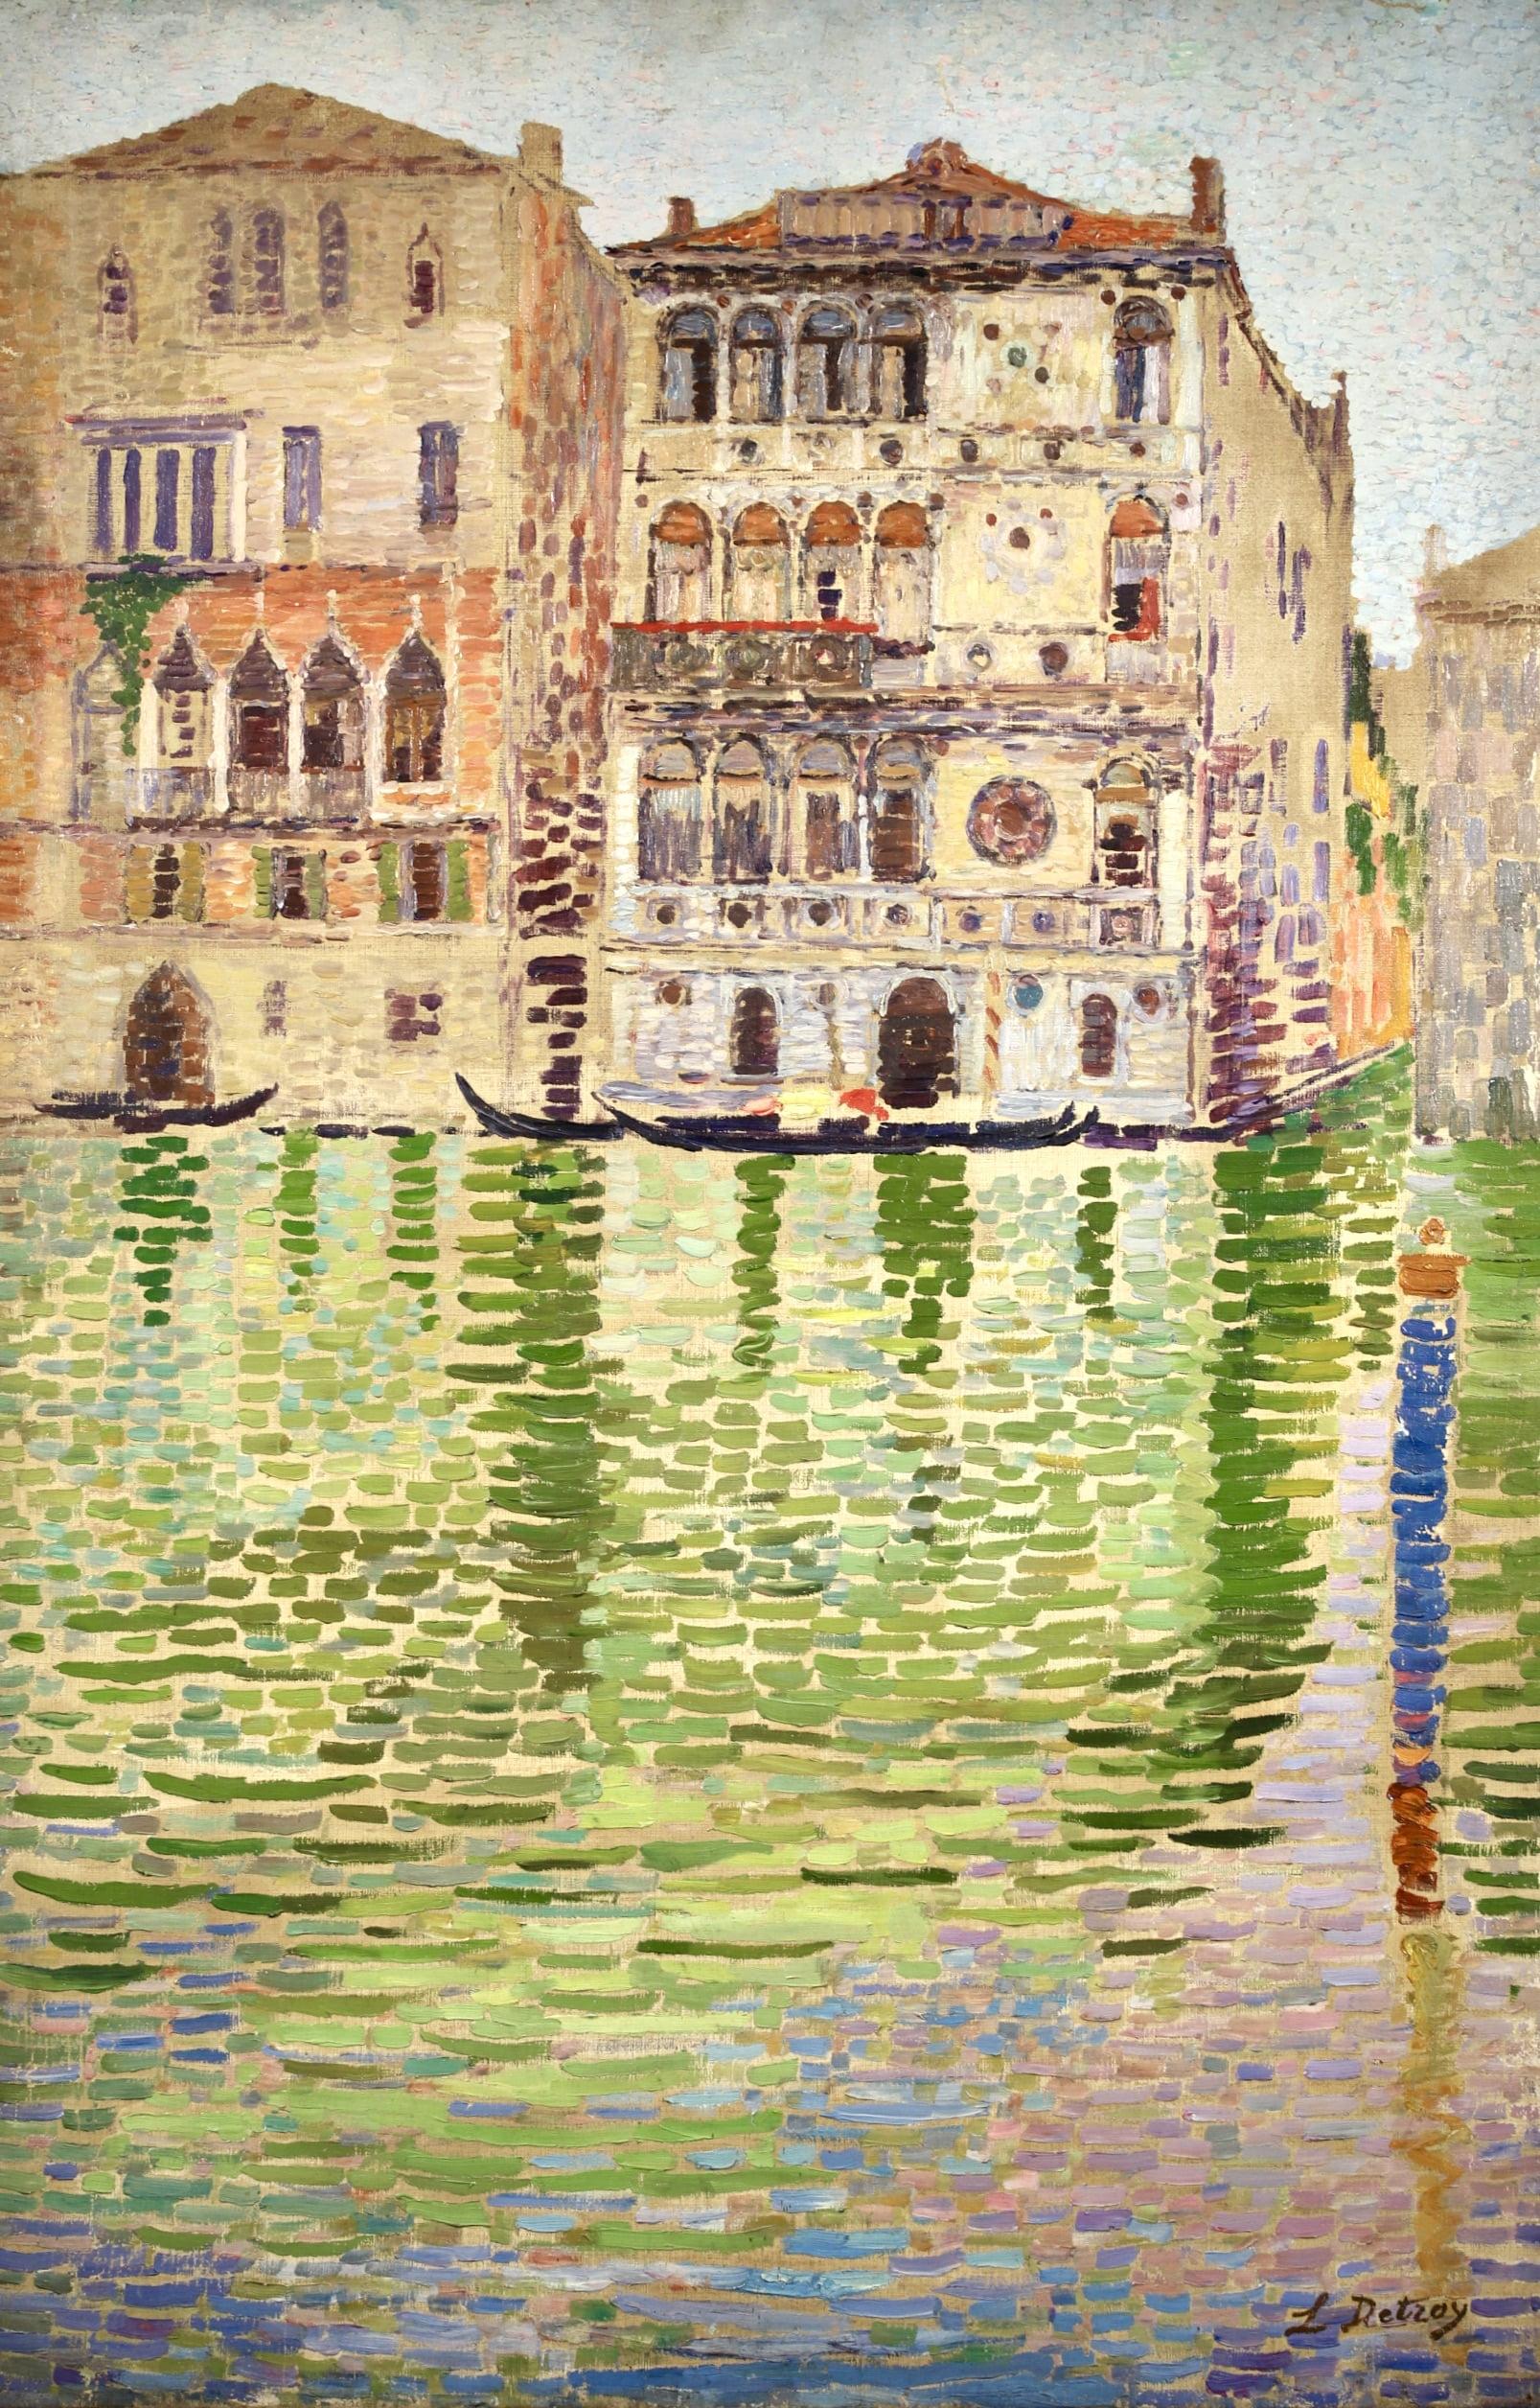 Signed landscape oil on canvas circa 1910 by French post impressionist painter Leon Detroy. This work is painted in a divisionist style and depicts a view of gondolas on the canal in Venice. 

Signature:
Signed lower right and stamped with the